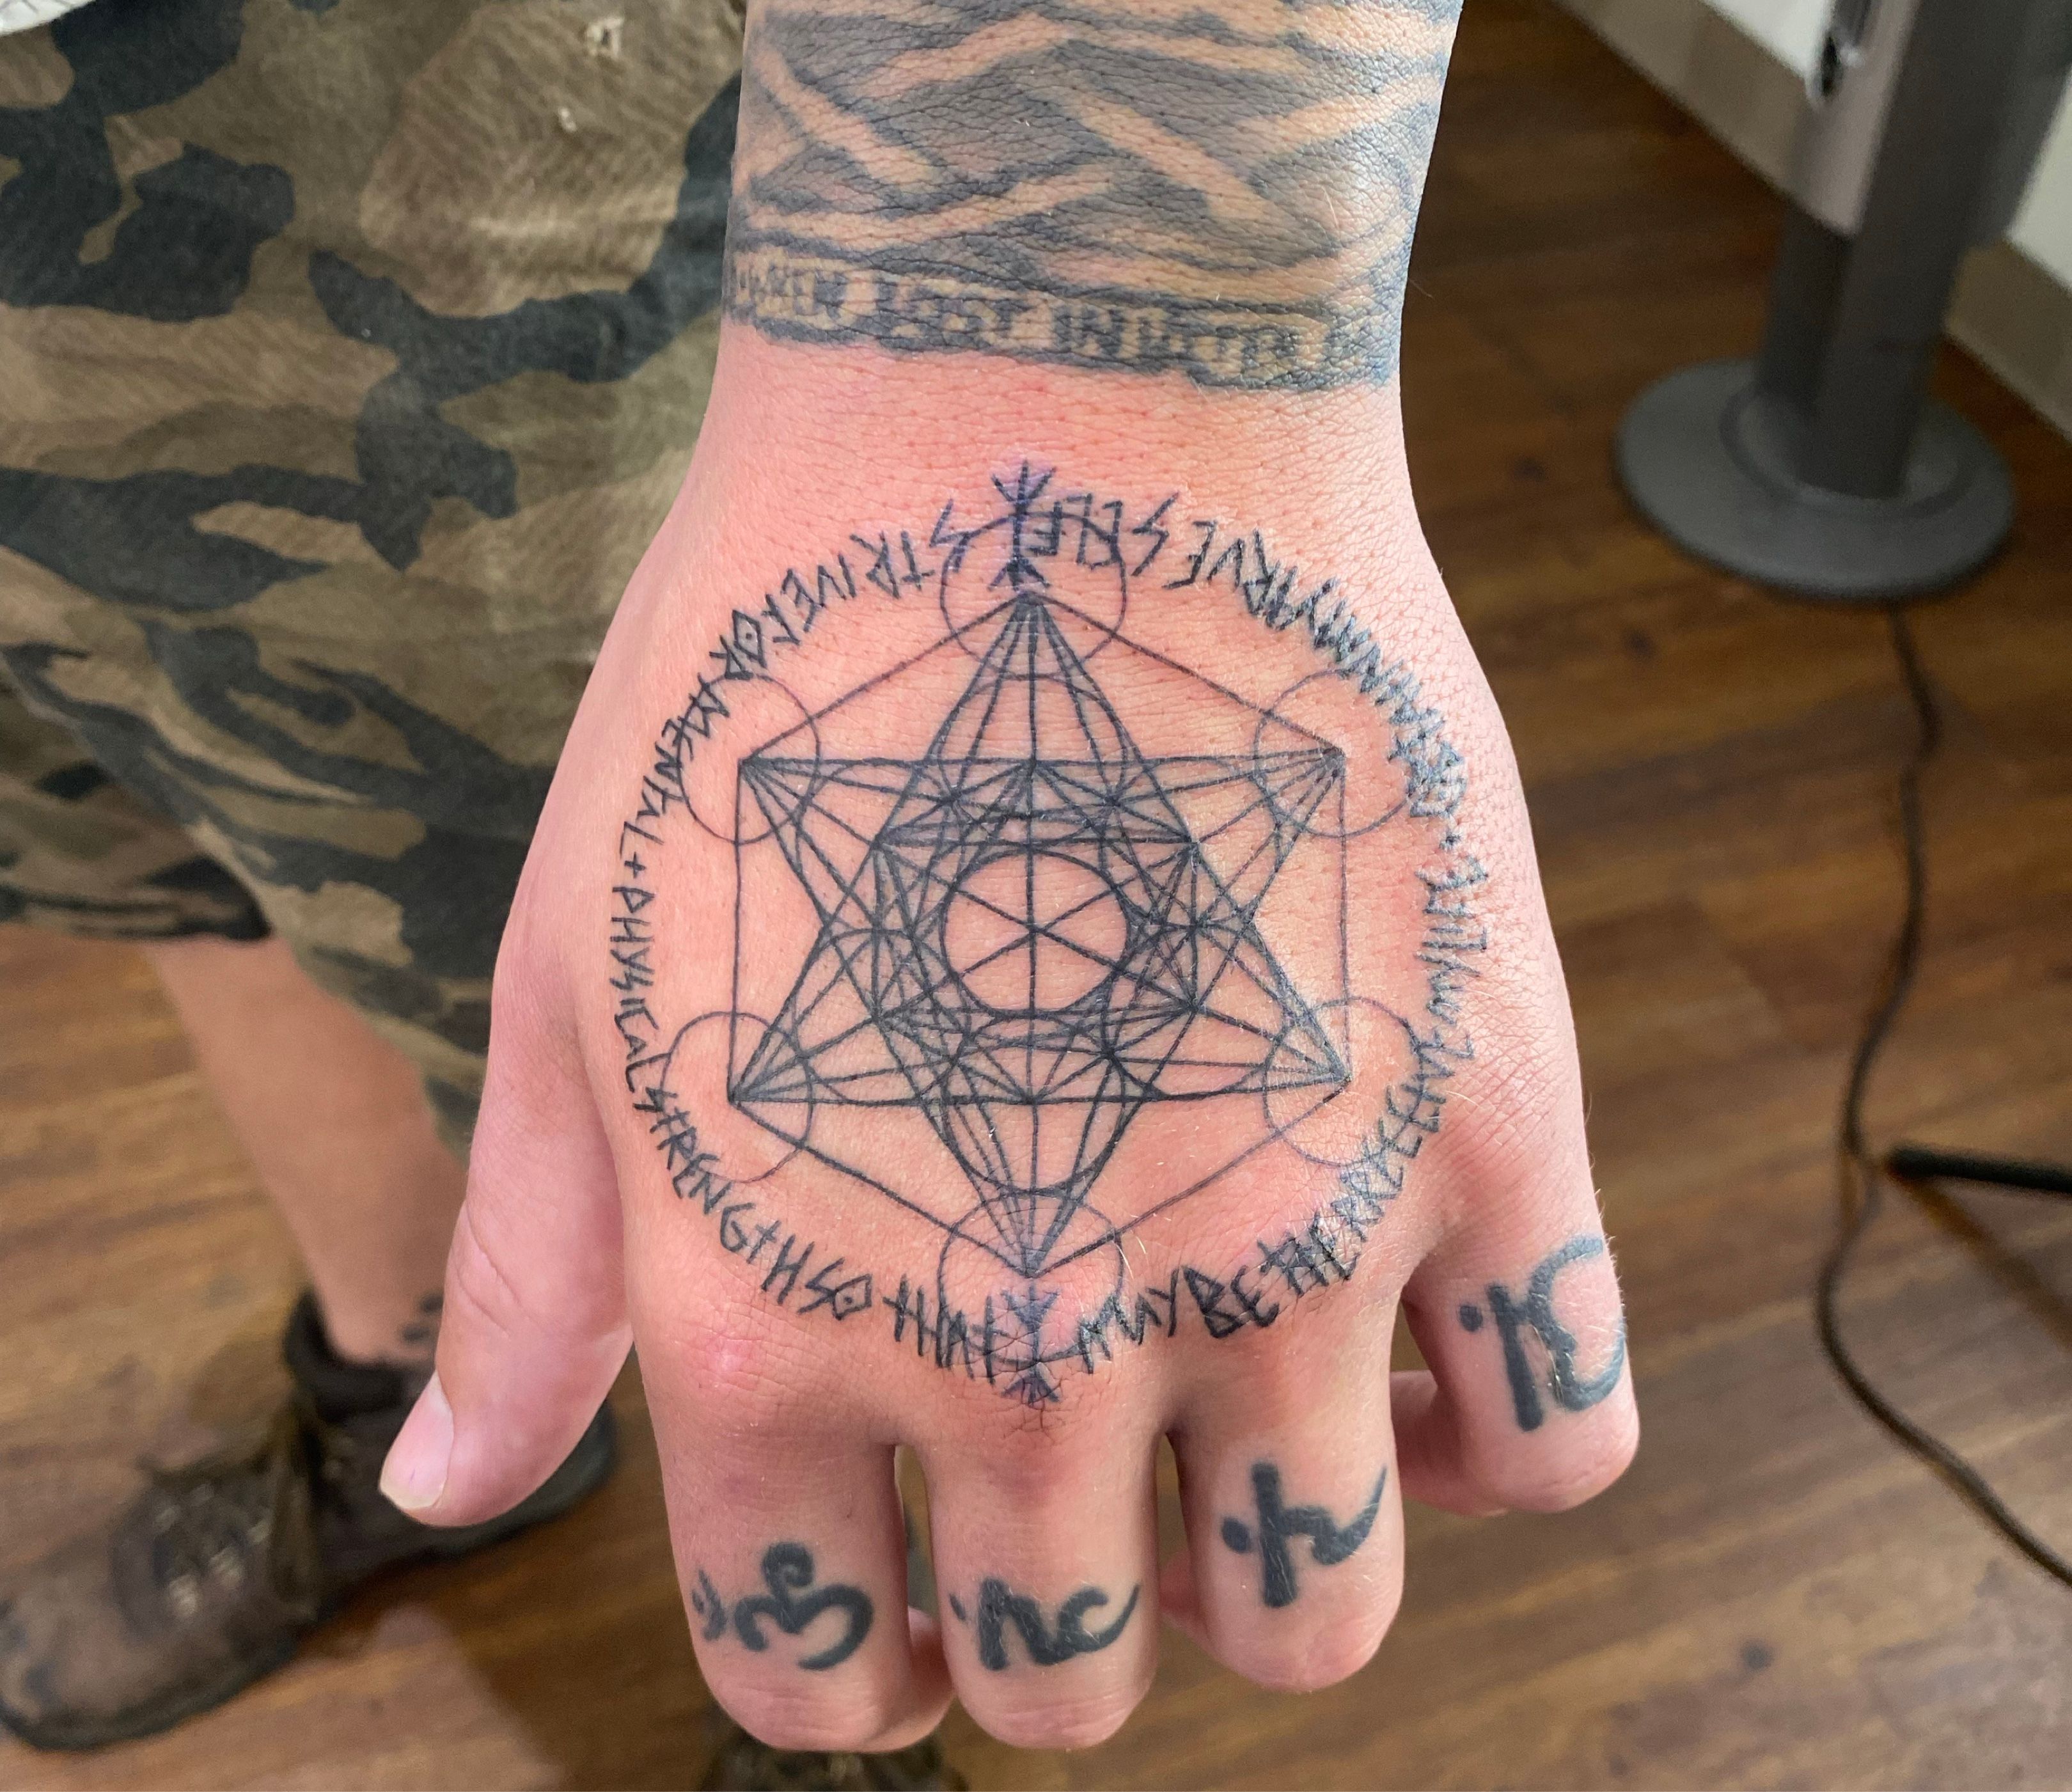 Share 85 about metatrons cube tattoo unmissable  indaotaonec